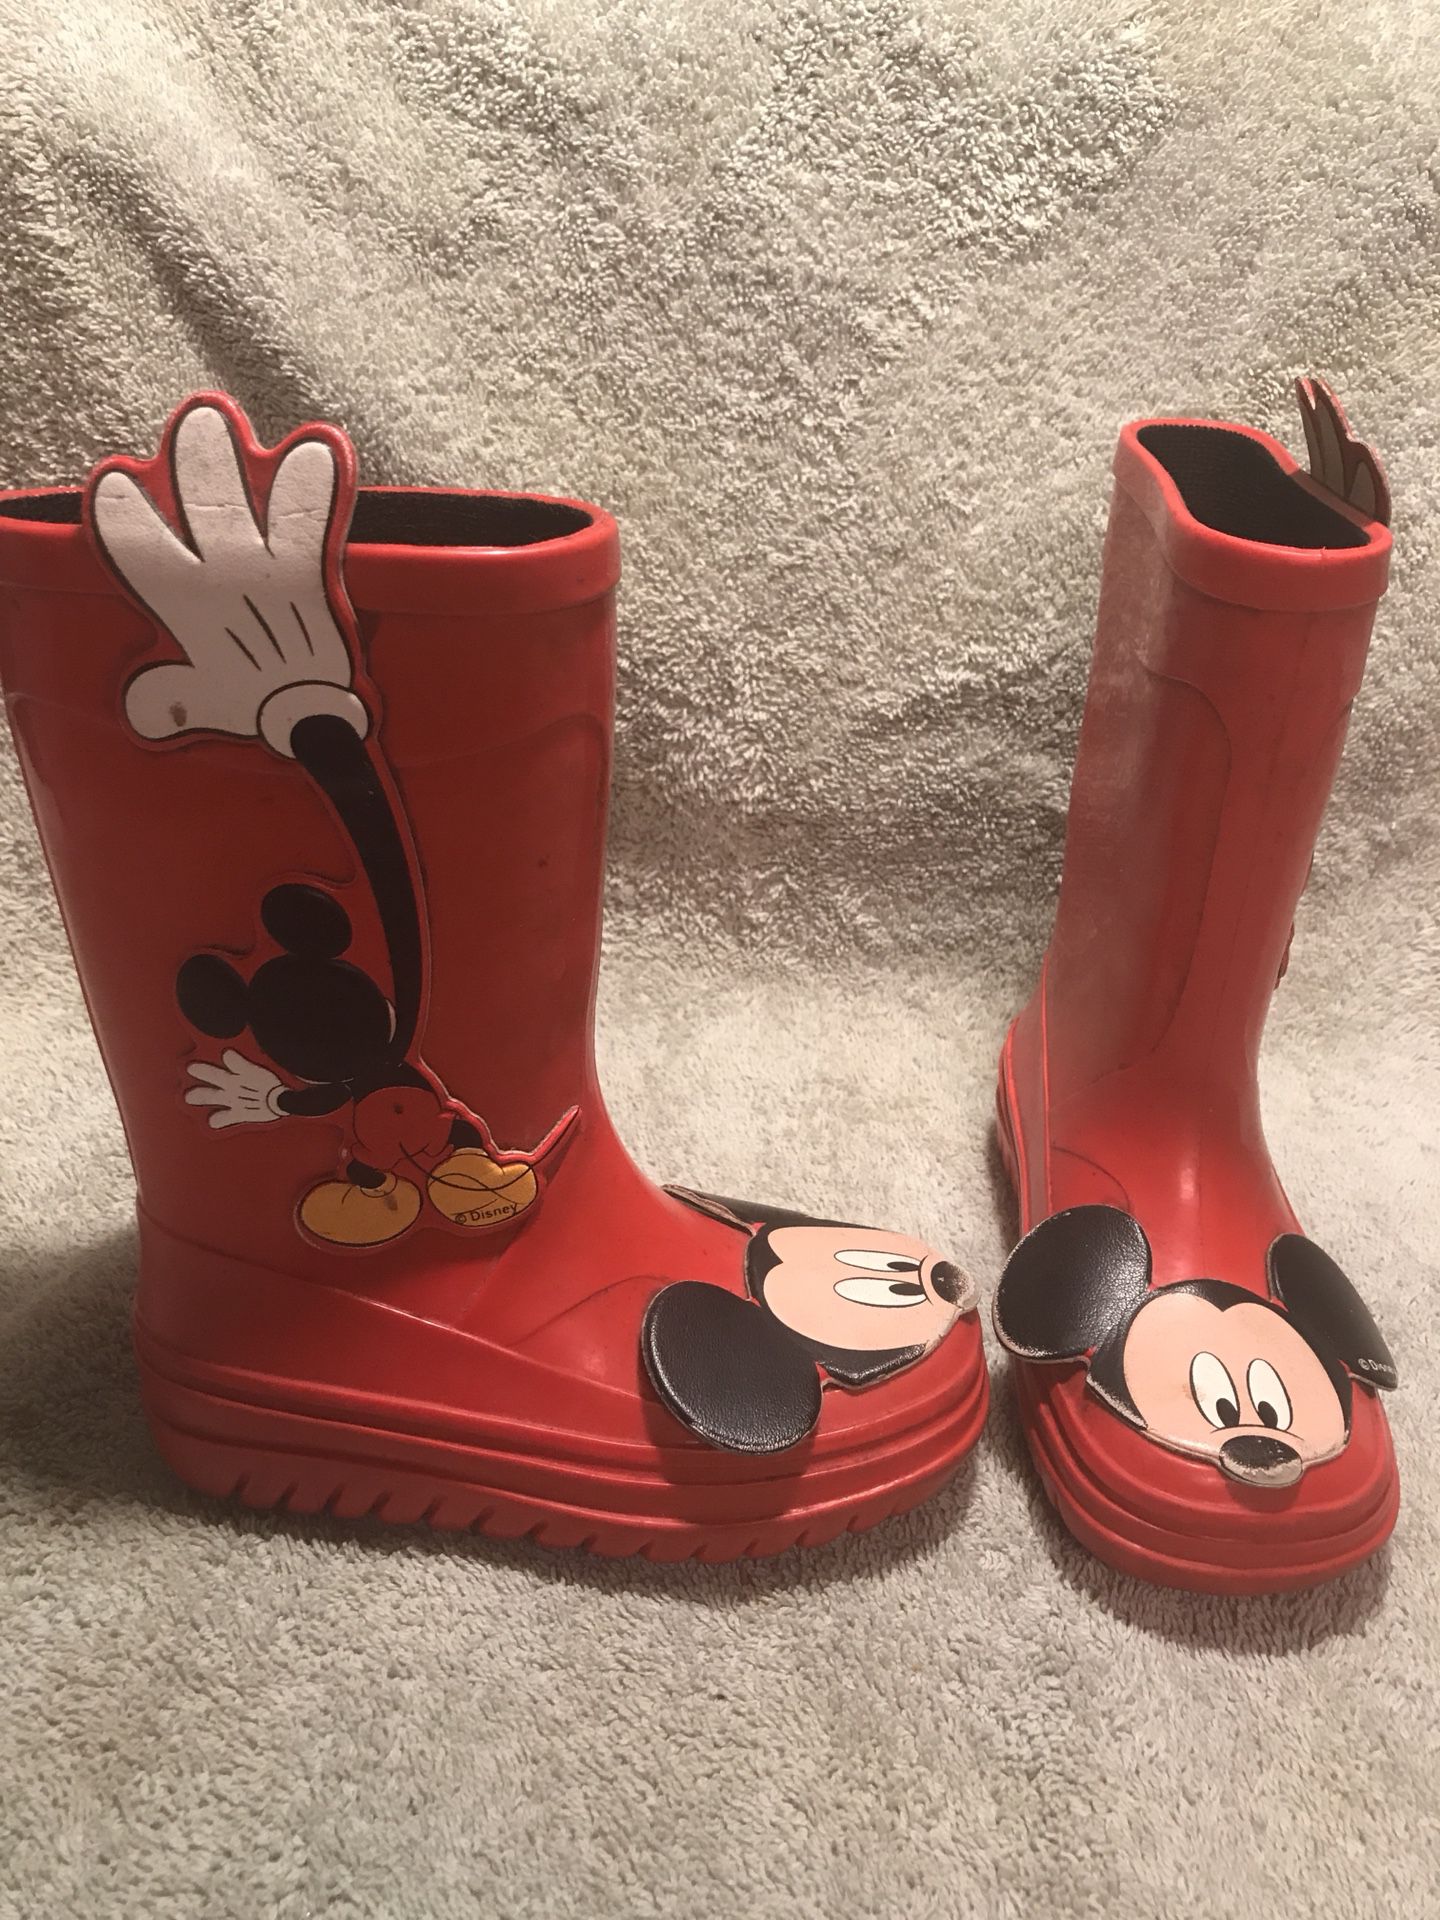 Disney Mickey Mouse kids red rain boots size 9